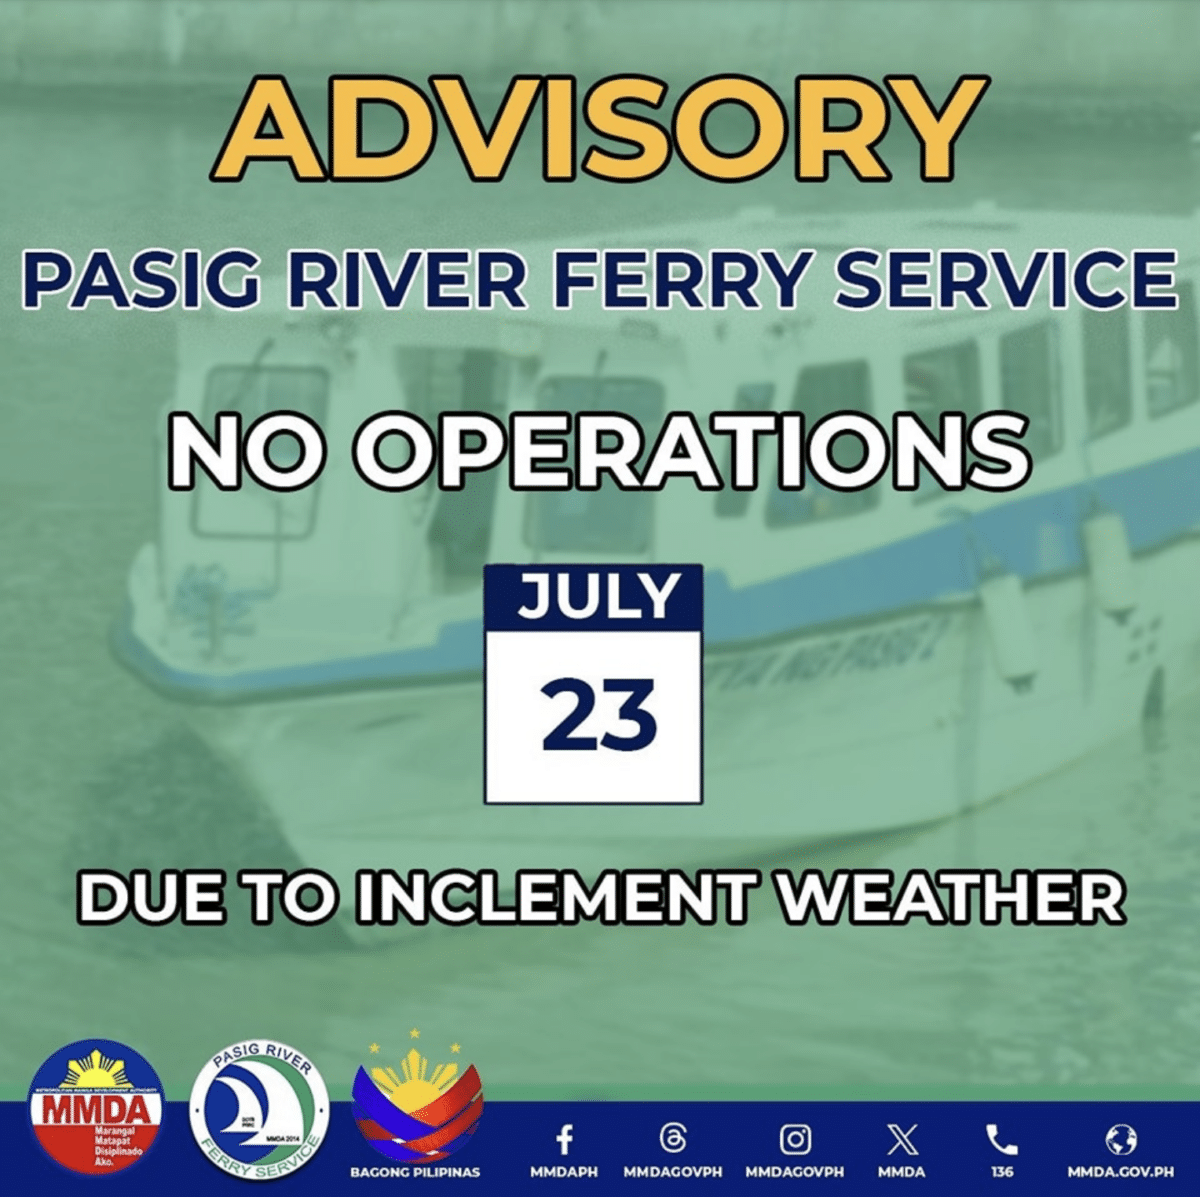 MMDA halts operations of Pasig River Ferry due to bad weather